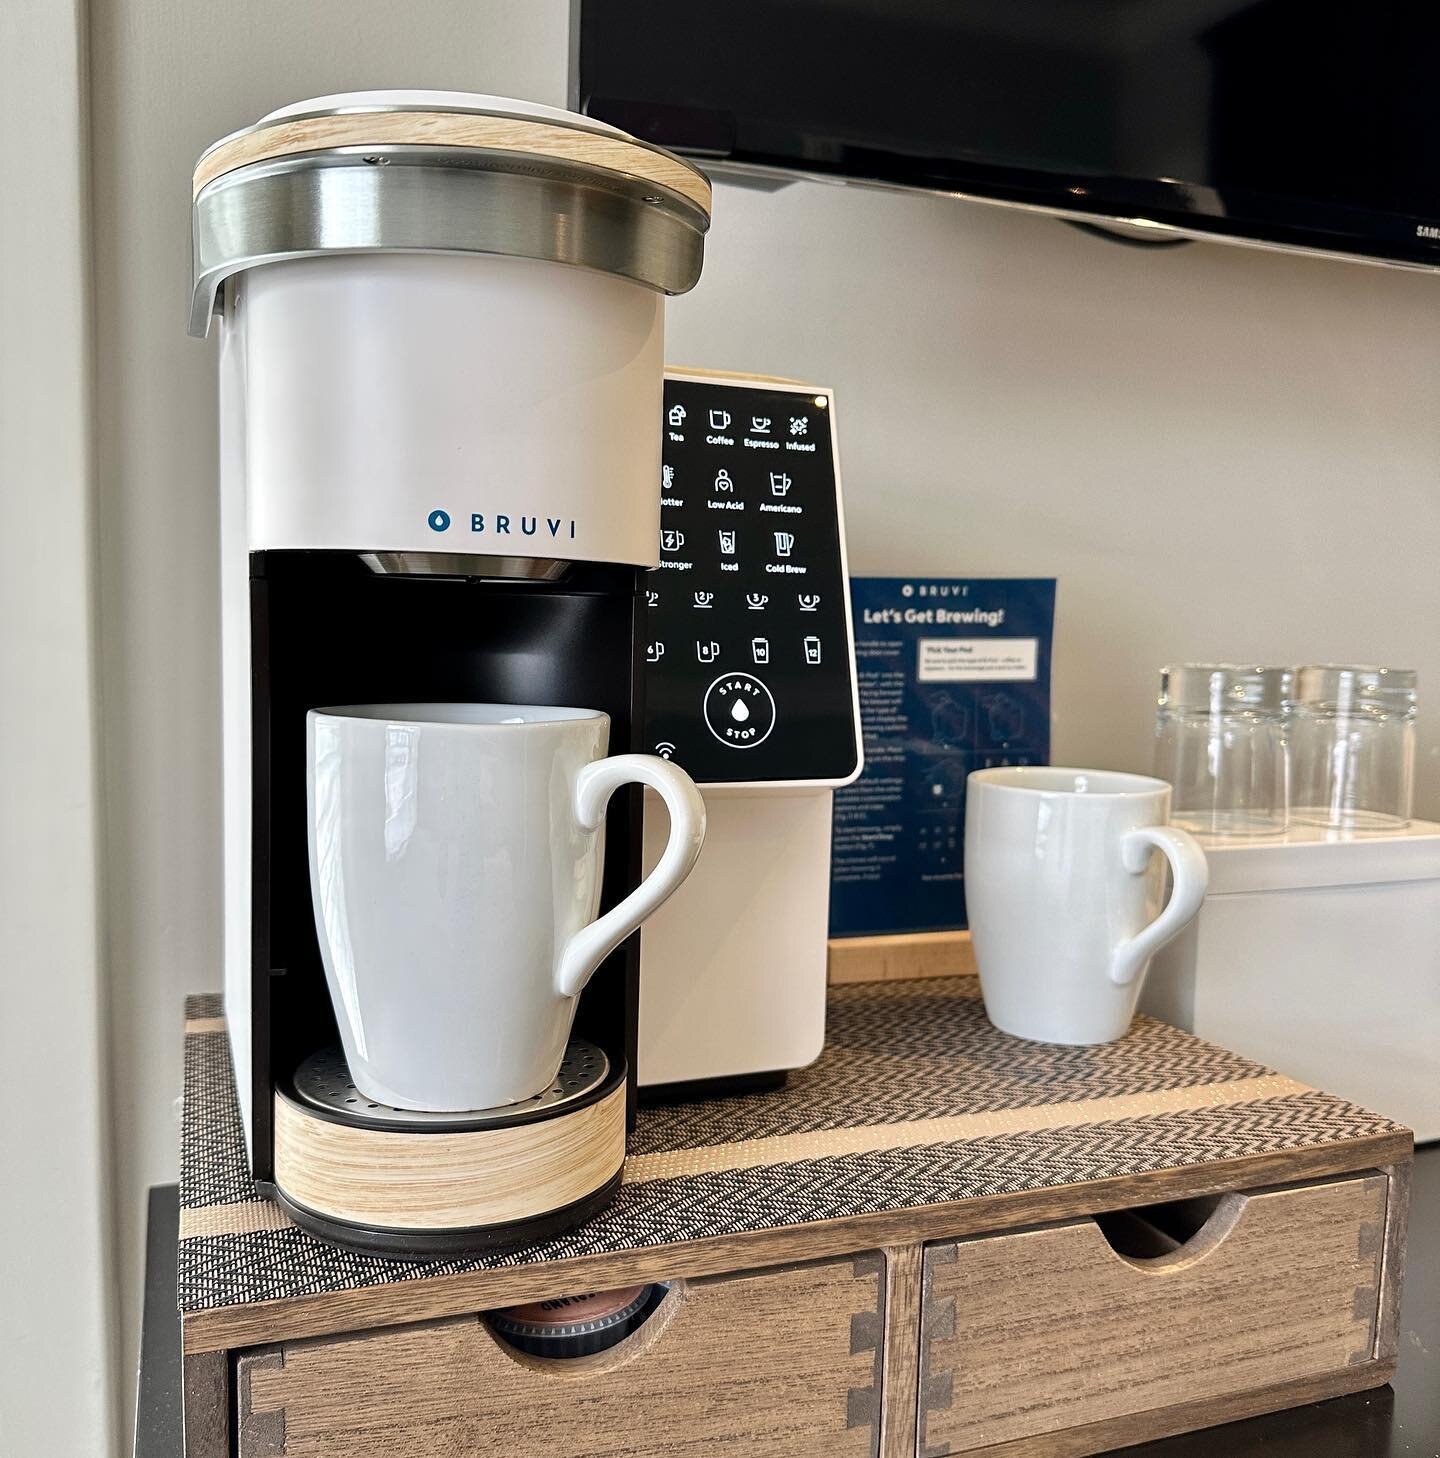 We believe that a great cup of coffee is the perfect way to start your day, and we are committed to providing our guests with a coffee experience that is both memorable and delicious. So why not indulge in our in-room coffee experience during your st